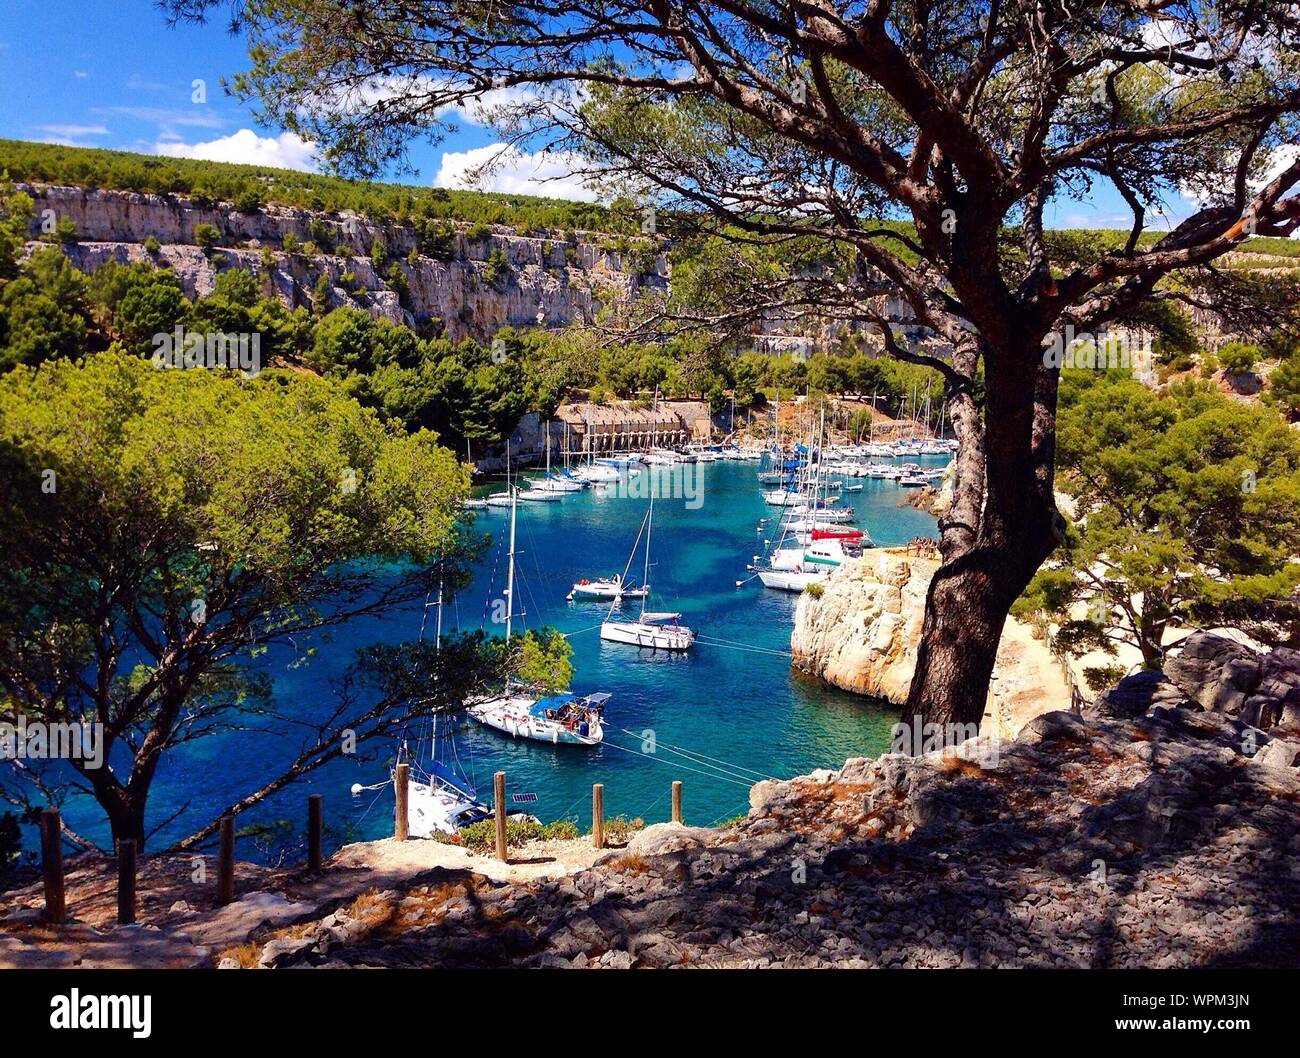 High Angle View Of Sailboats Moored In River At Calanque De Port-miou Stock Photo